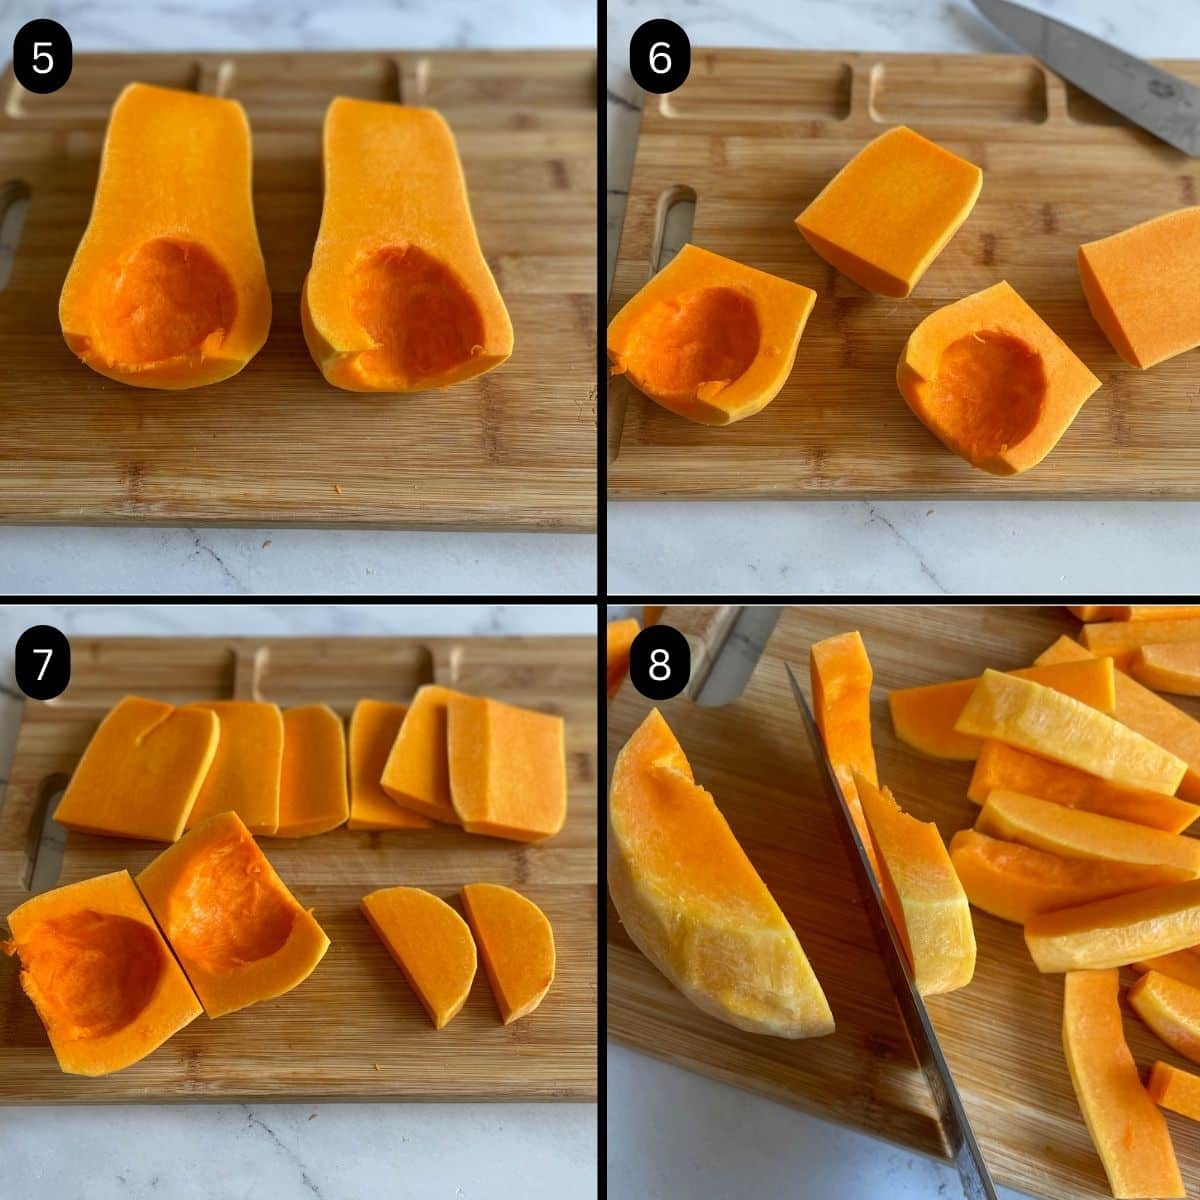 Steps 5 through 8 of how to properly cut a butternut squash are shown.